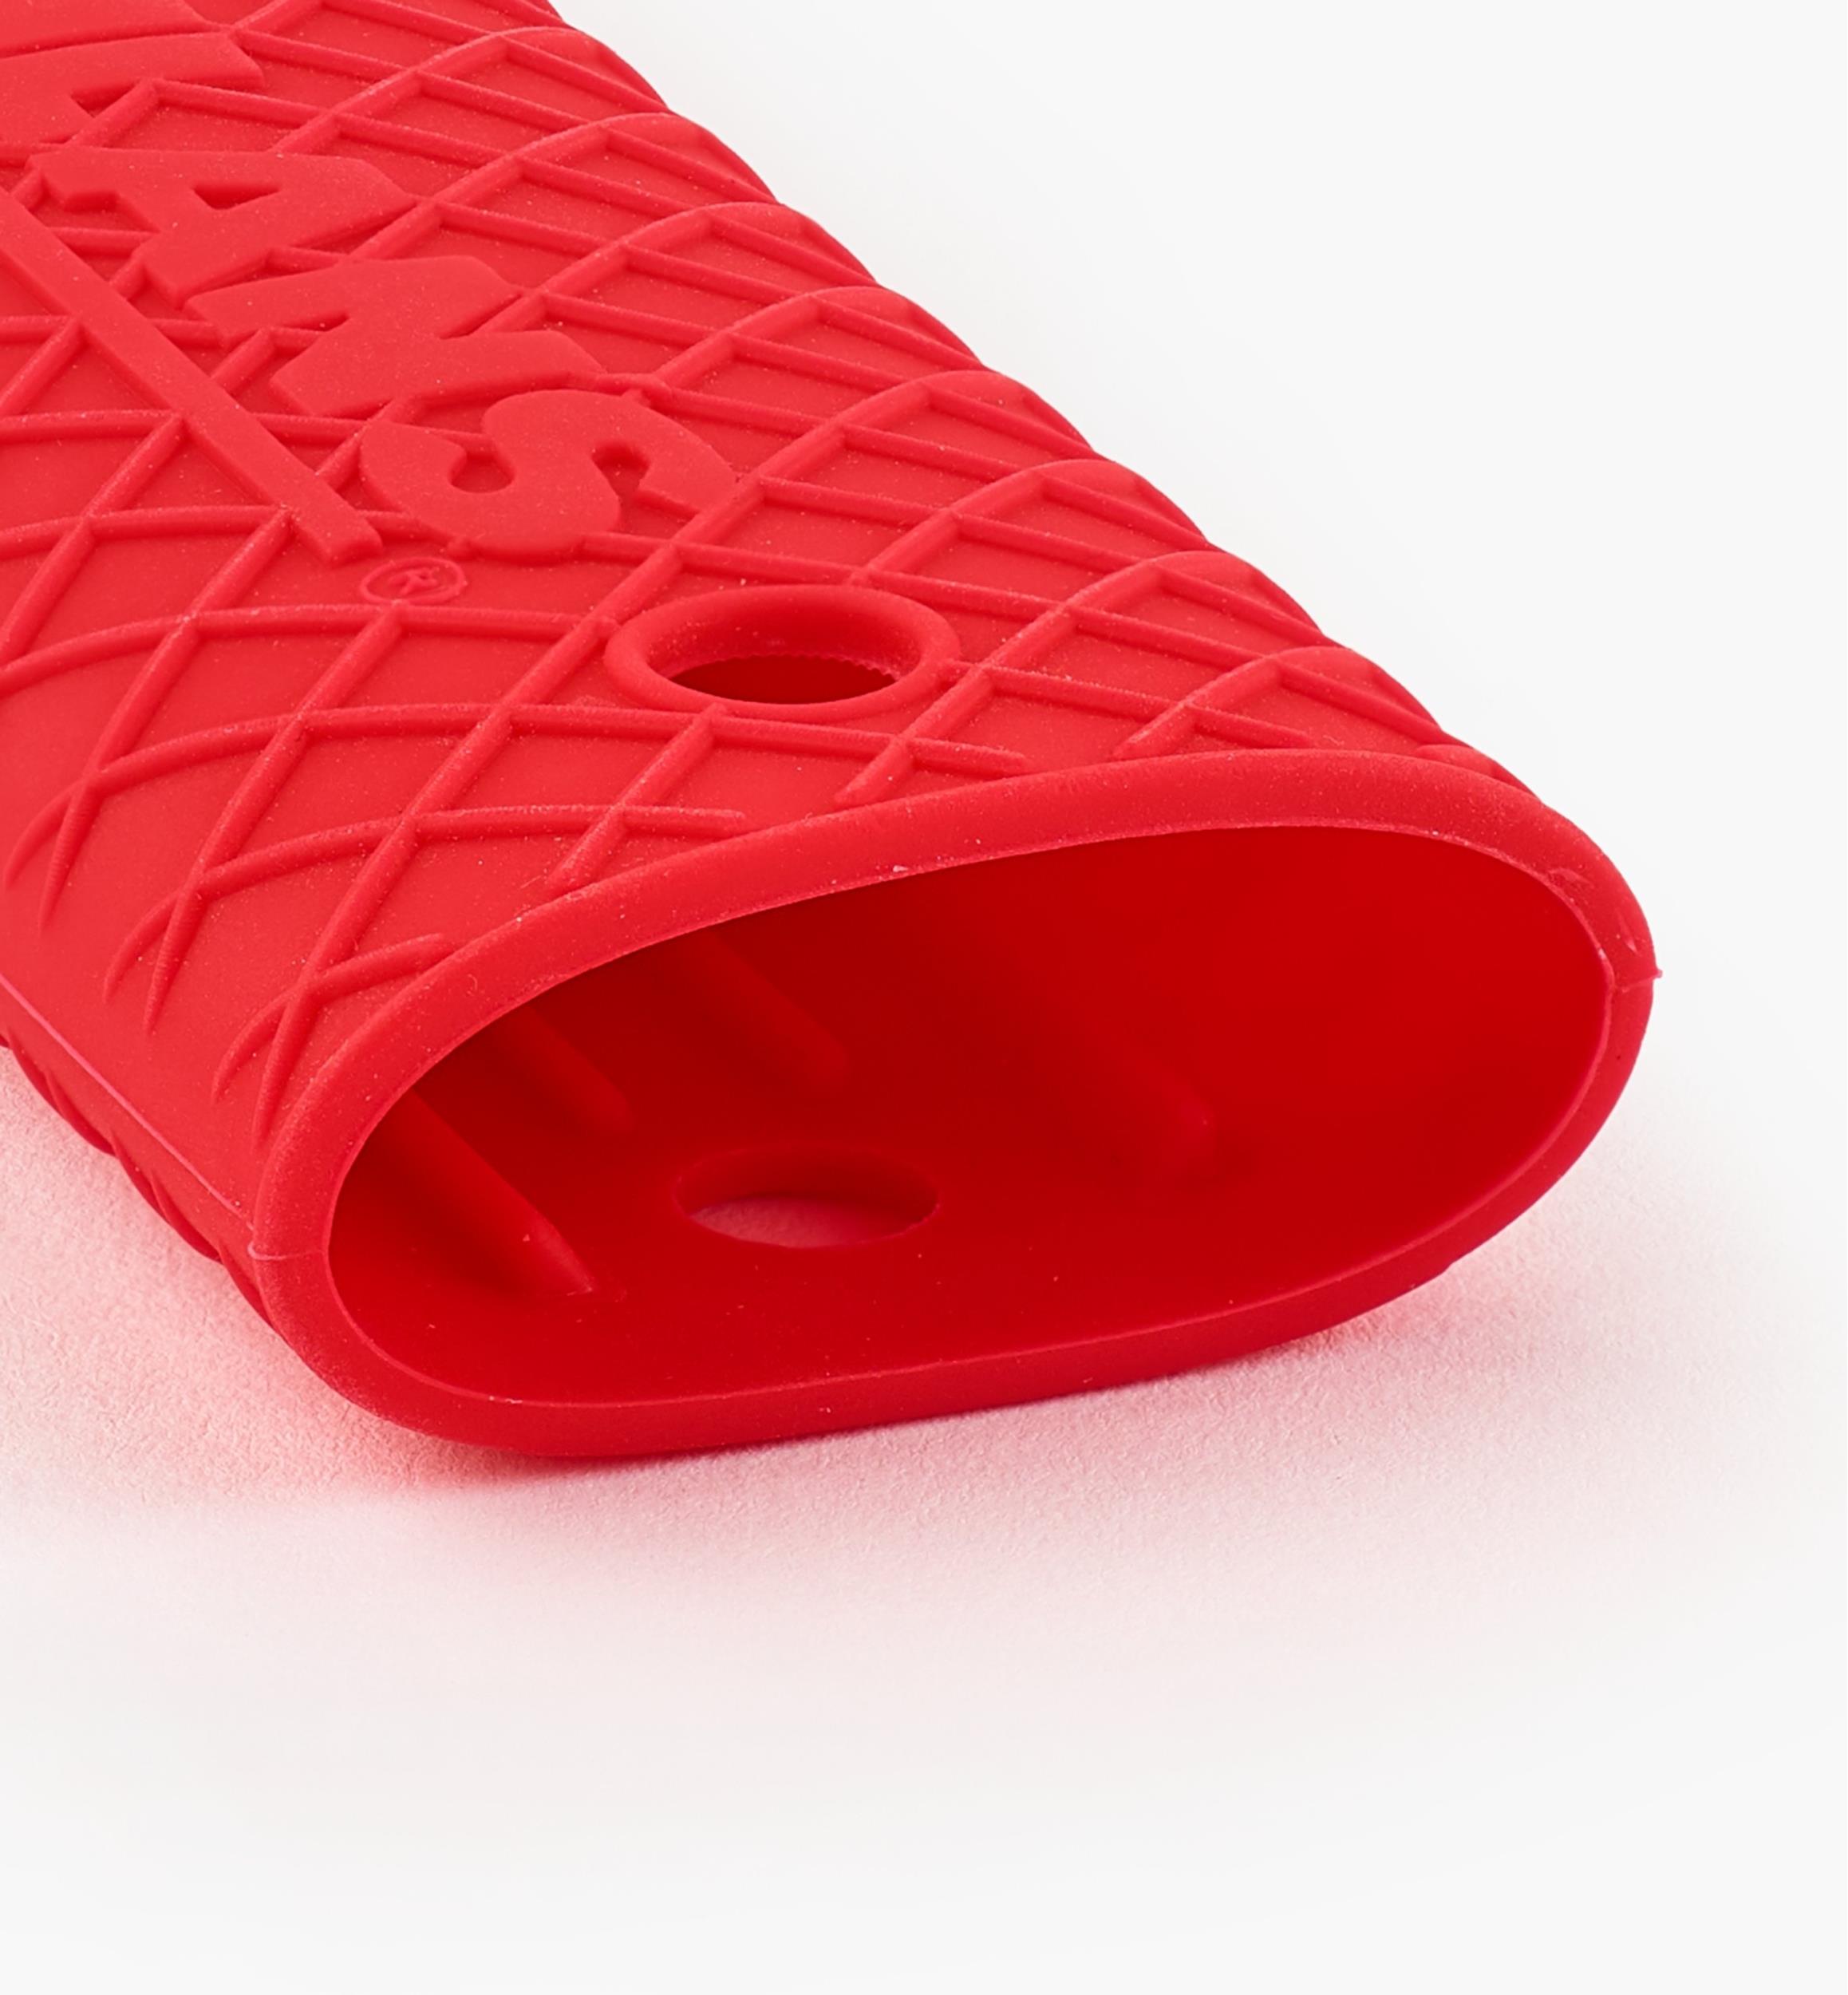 Silicone Cast-Iron Handle Grip